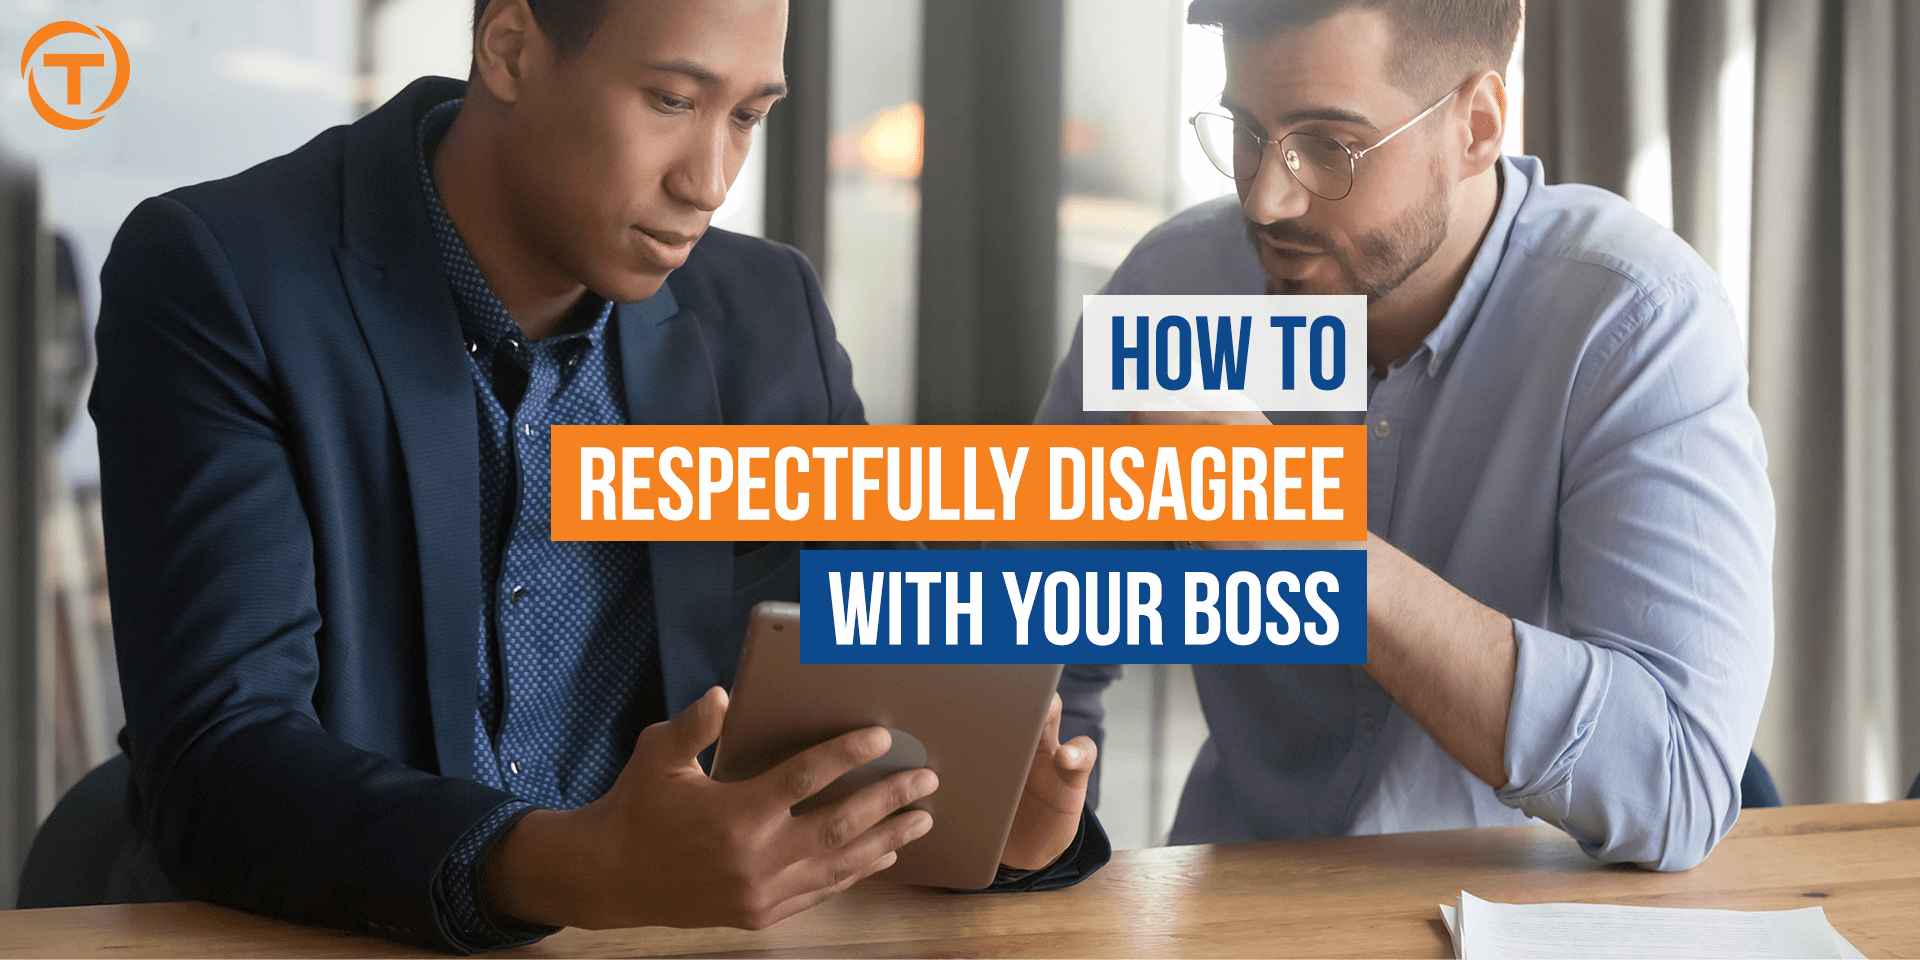 Blog Respectfully Disagree With Your Boss